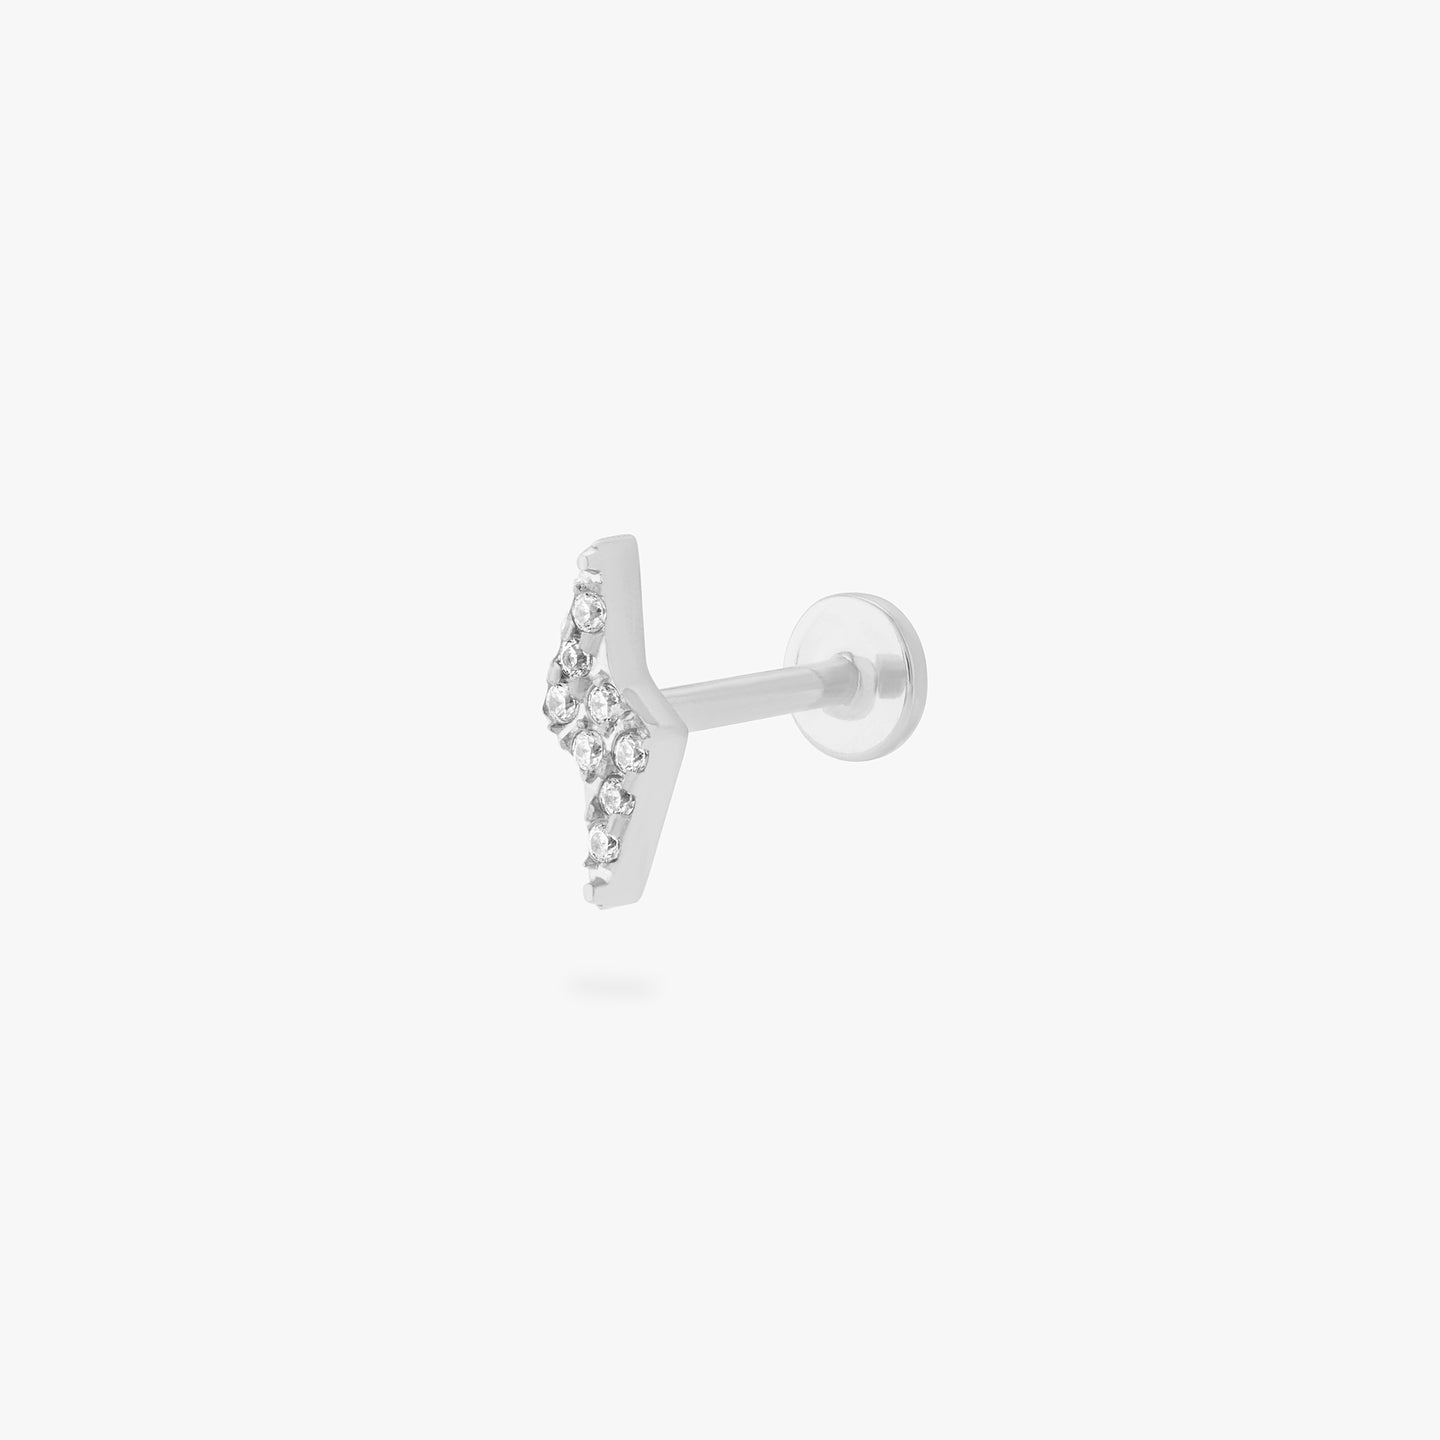 This is an image of a silver/clear pave lightning-bolt shaped flatback top with a silver labret with a circle disc that has an 